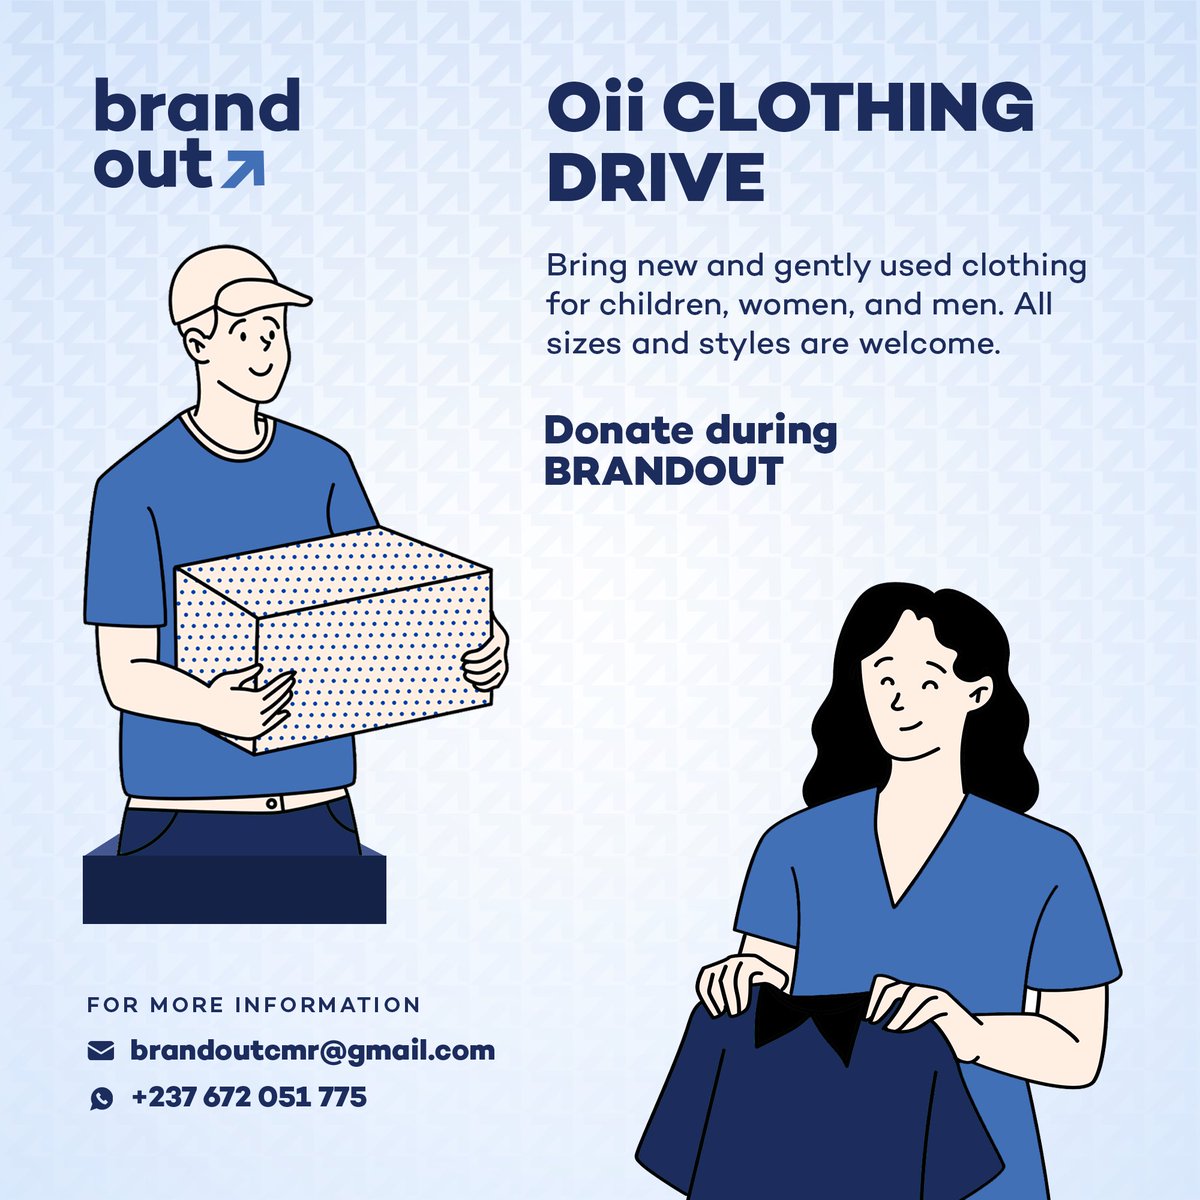 As part of its social responsibility goals, @oiicompany is organizing a clothing drive to collect new and fairly used clothing for #AnglophoneCrisis refugees. 

Donate during BRANDOUT or send your packages via a travel agency. Contact information on the flyer.